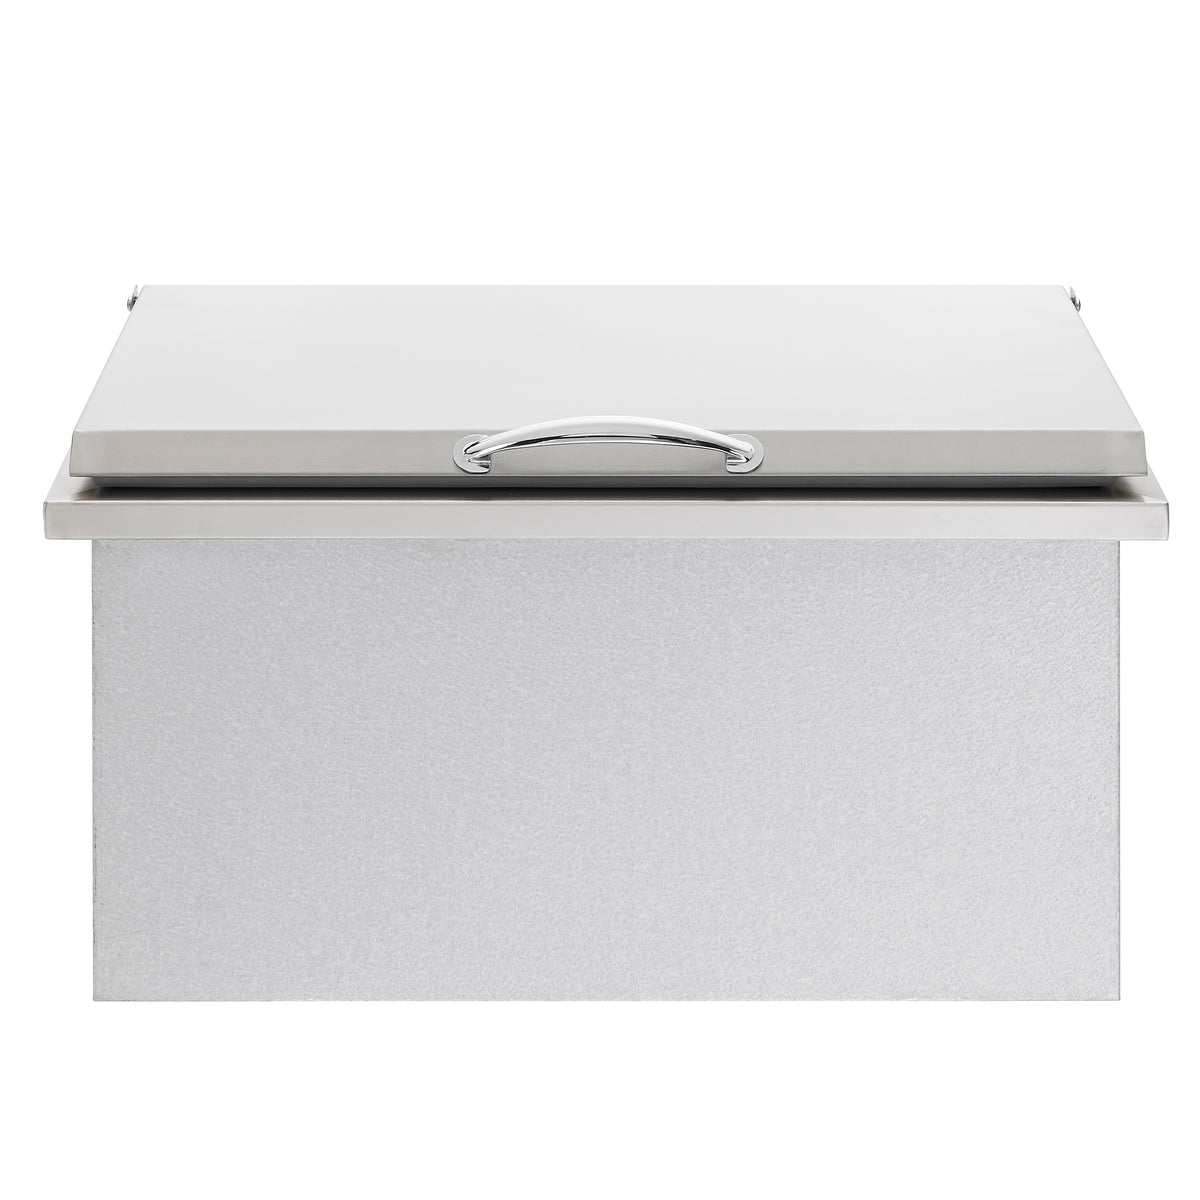 Sunstone 28-Inch Drop-In Ice Bin Cooler with Stainless Lid & Dual Dividers